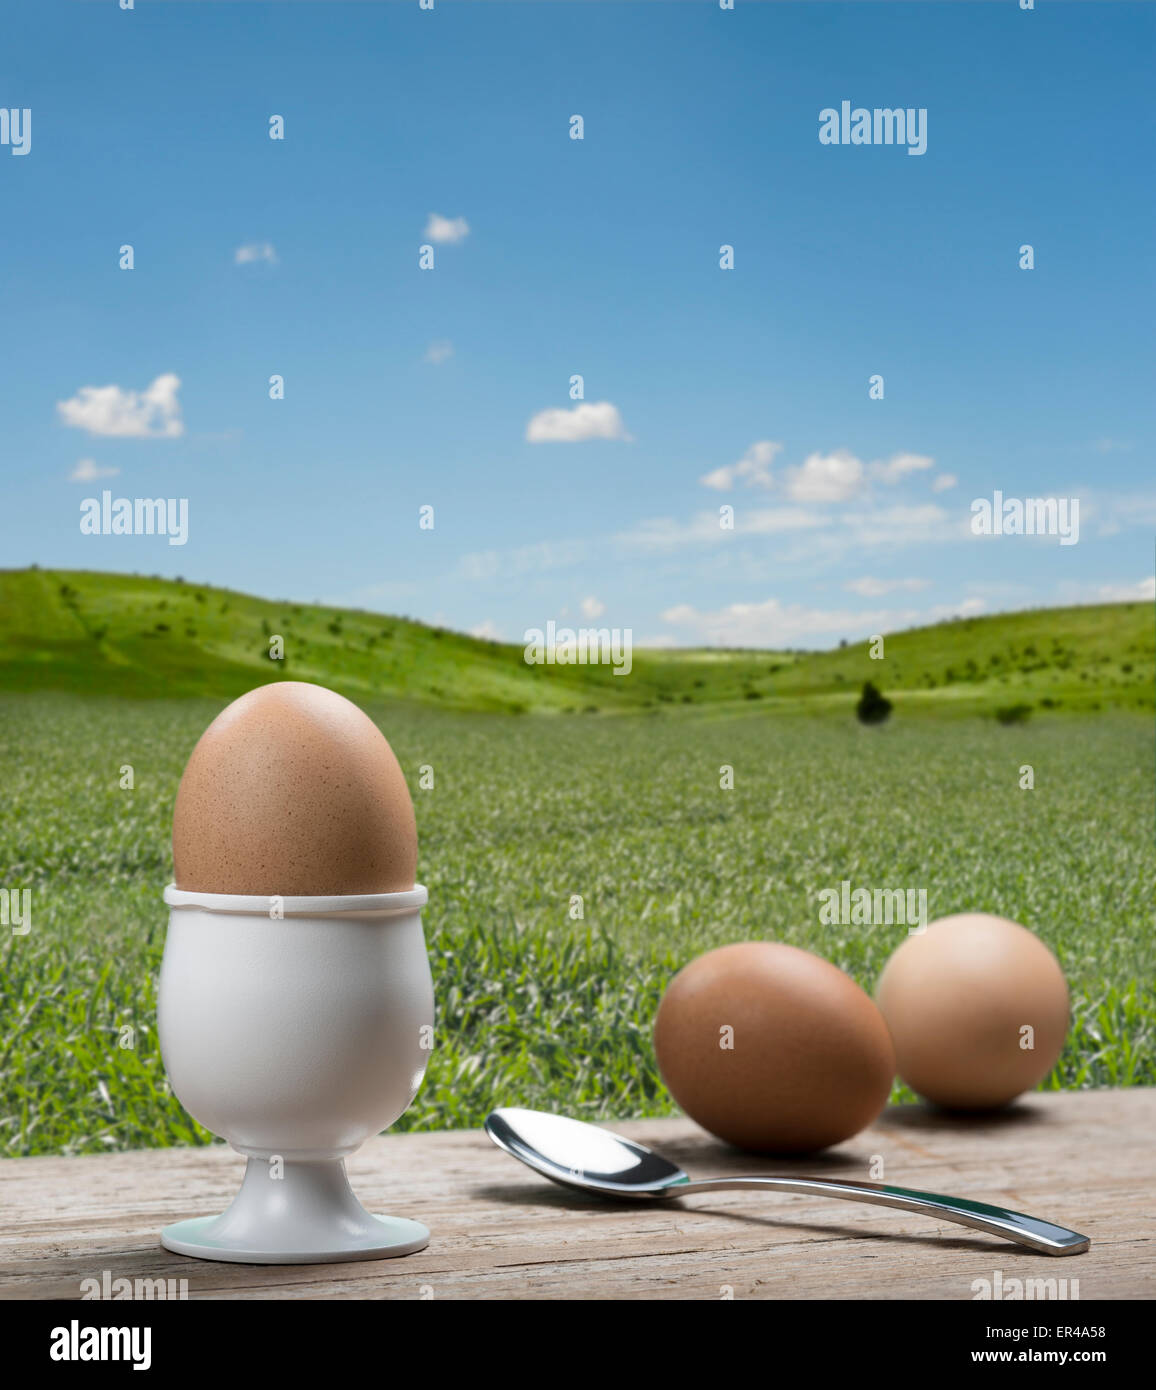 eggcup with teaspoon and boiled egg on wooden table with summer landscape Stock Photo